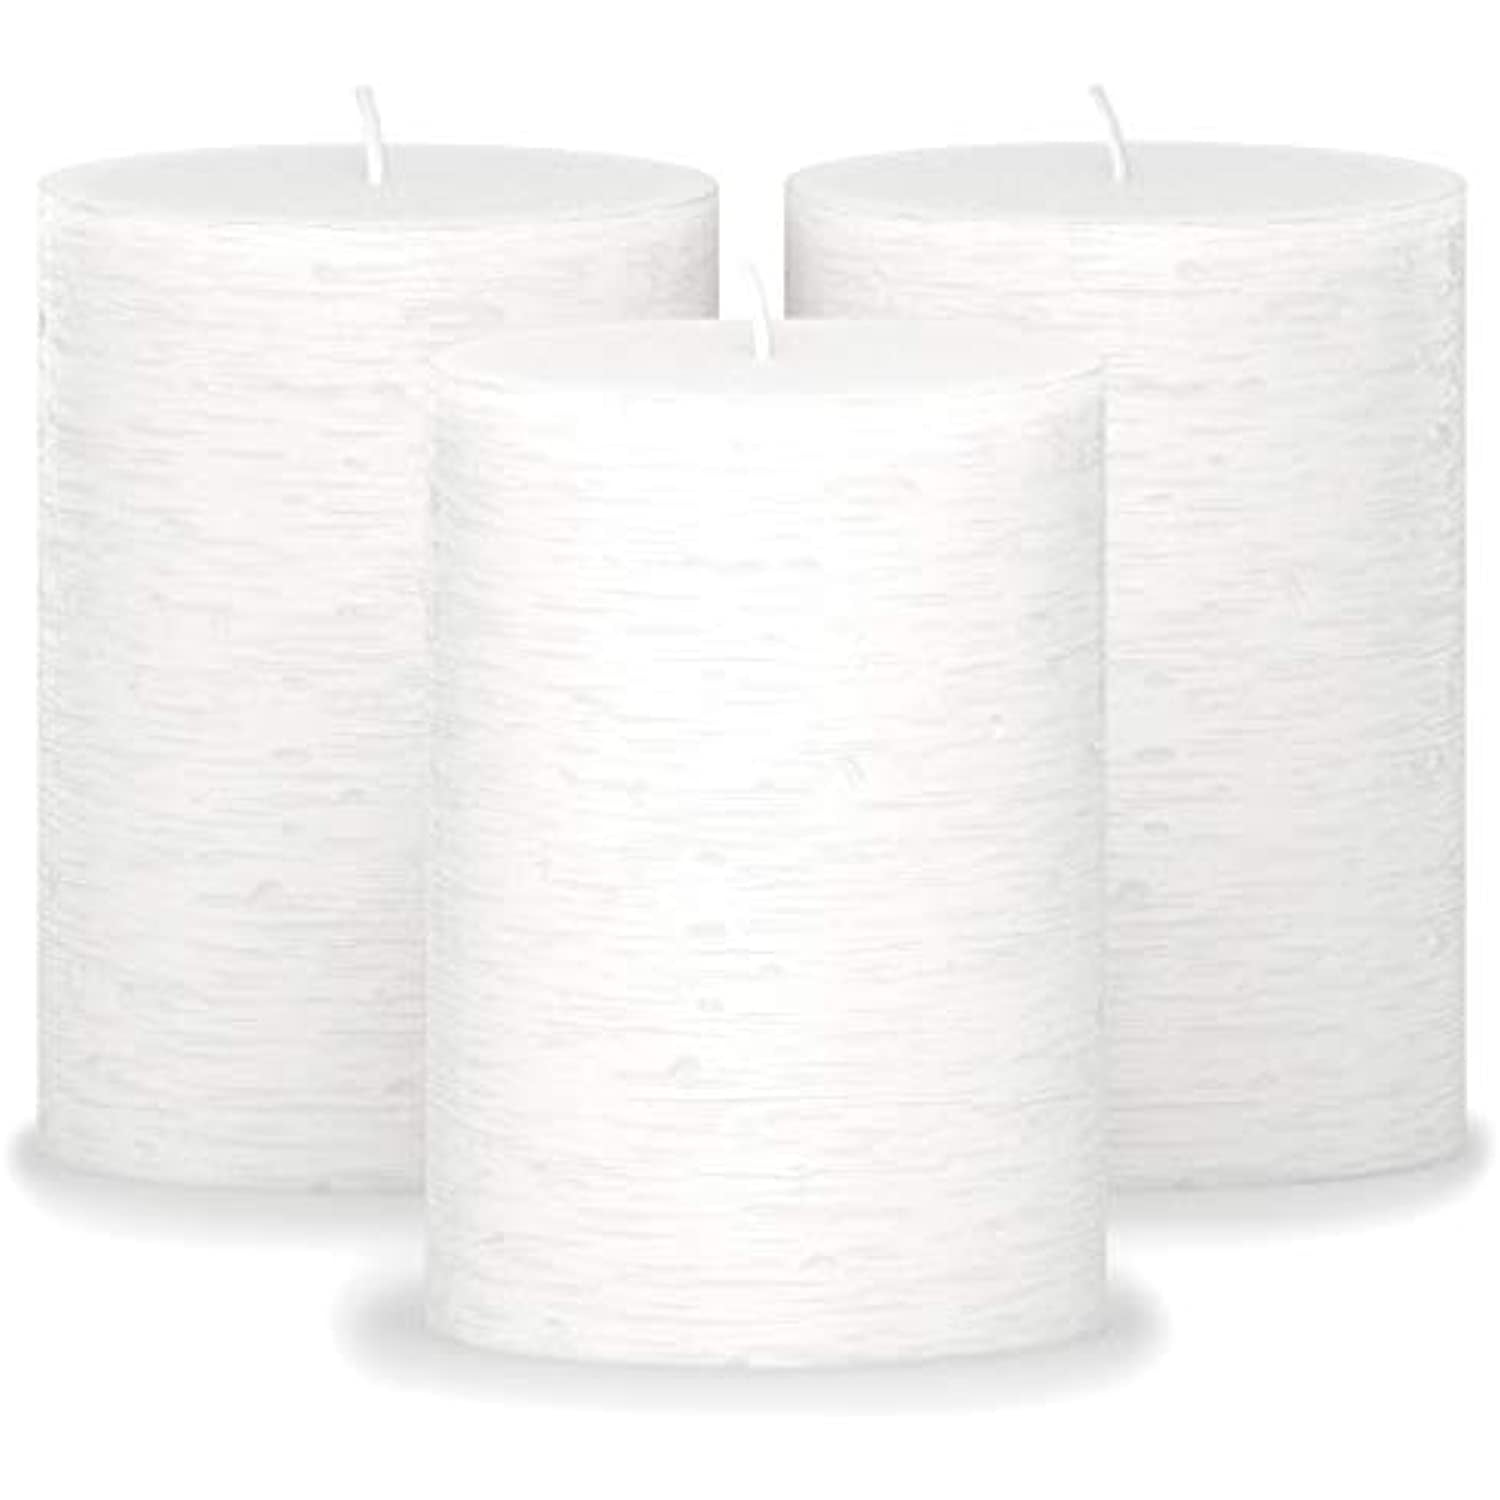 CANDWAX Assorted Candles Pillar 4 and 8 Unscented Candles Long Burning Candles Ideal as Wedding Candles and Candles for Home- Silver Candles Set of 3 inch Rustic Pillar Candles Includes 3